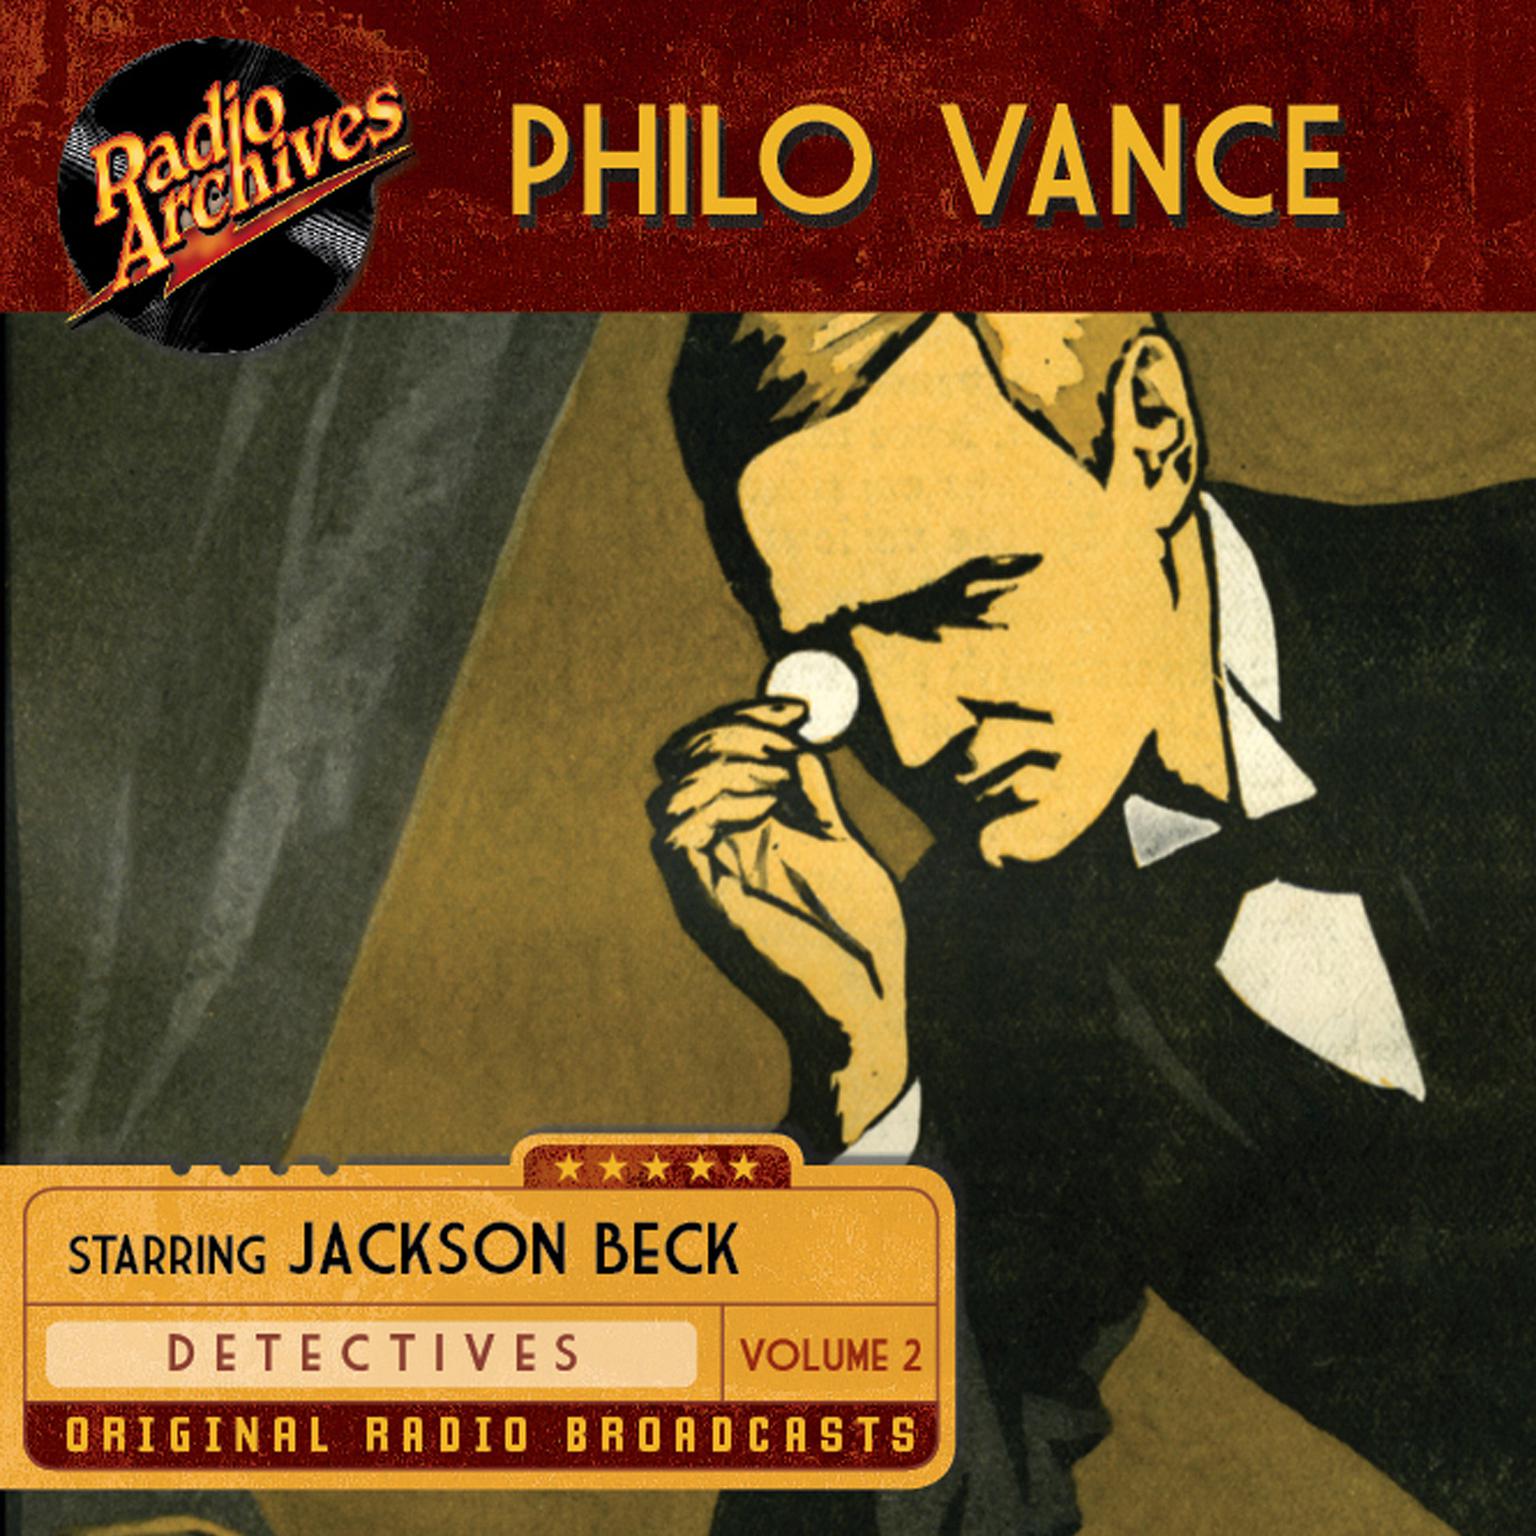 Philo Vance, Vol. 2 Audiobook, by various authors